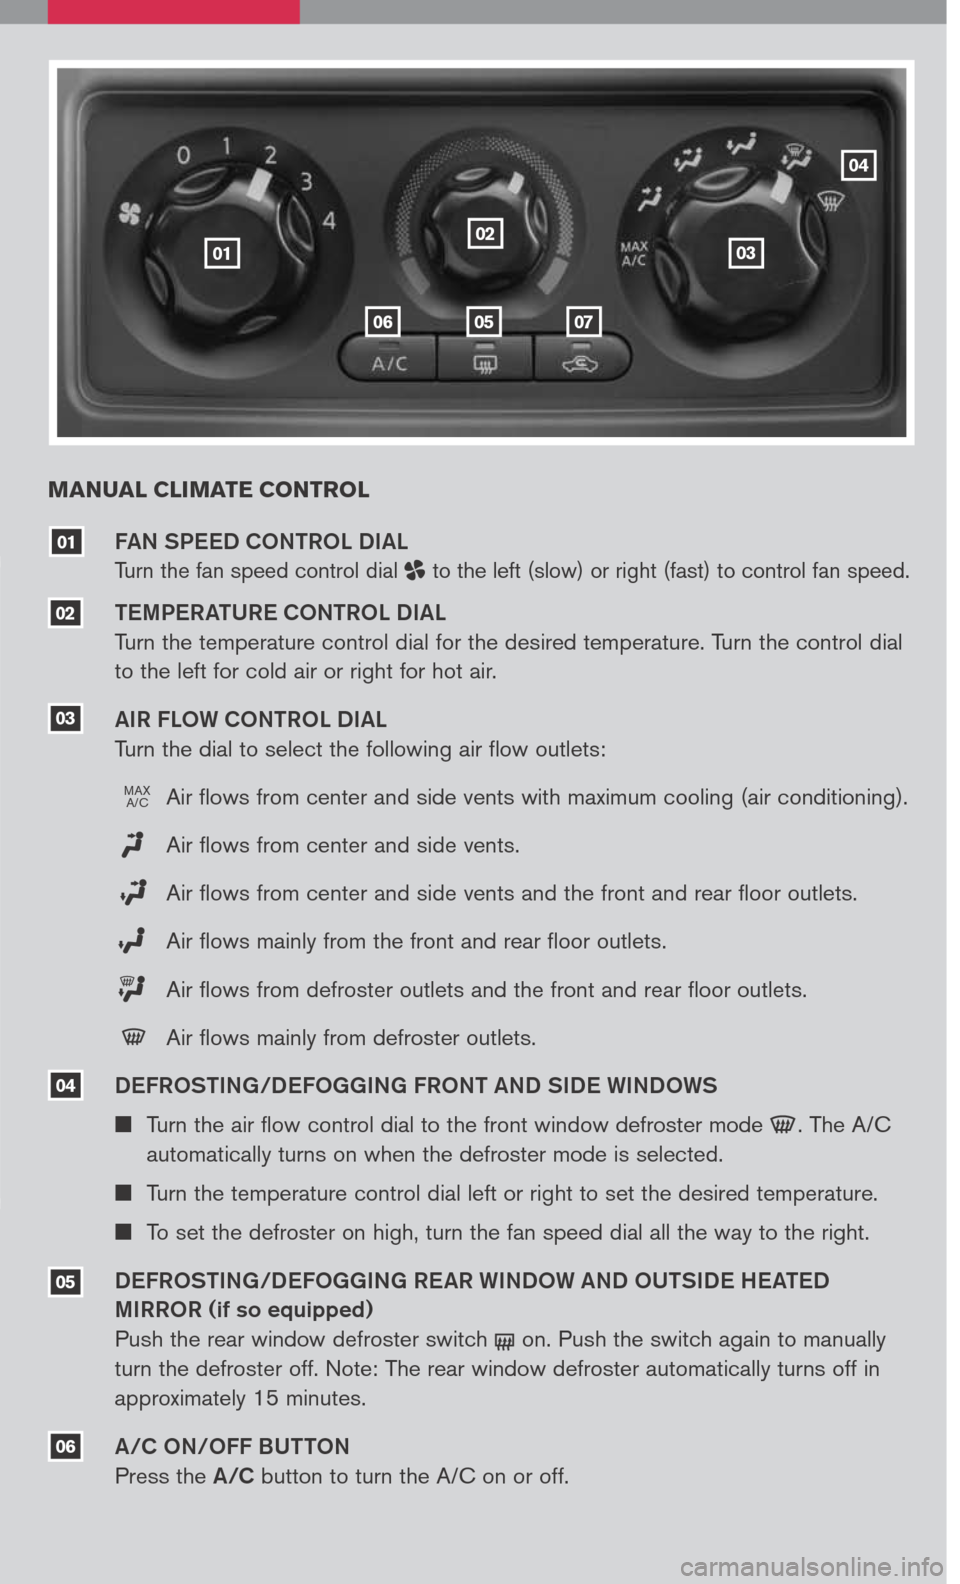 NISSAN XTERRA 2007 N50 / 2.G Quick Reference Guide 
MANUAL CLIMATE CONTROL
FAN SPEED CONTROL DIAL 
Turn the fan speed control dial  to the left (slow) or right (fast) to control fan speed. 
TEMPERATURE CONTROL DIAL 
Turn the temperature control dial f